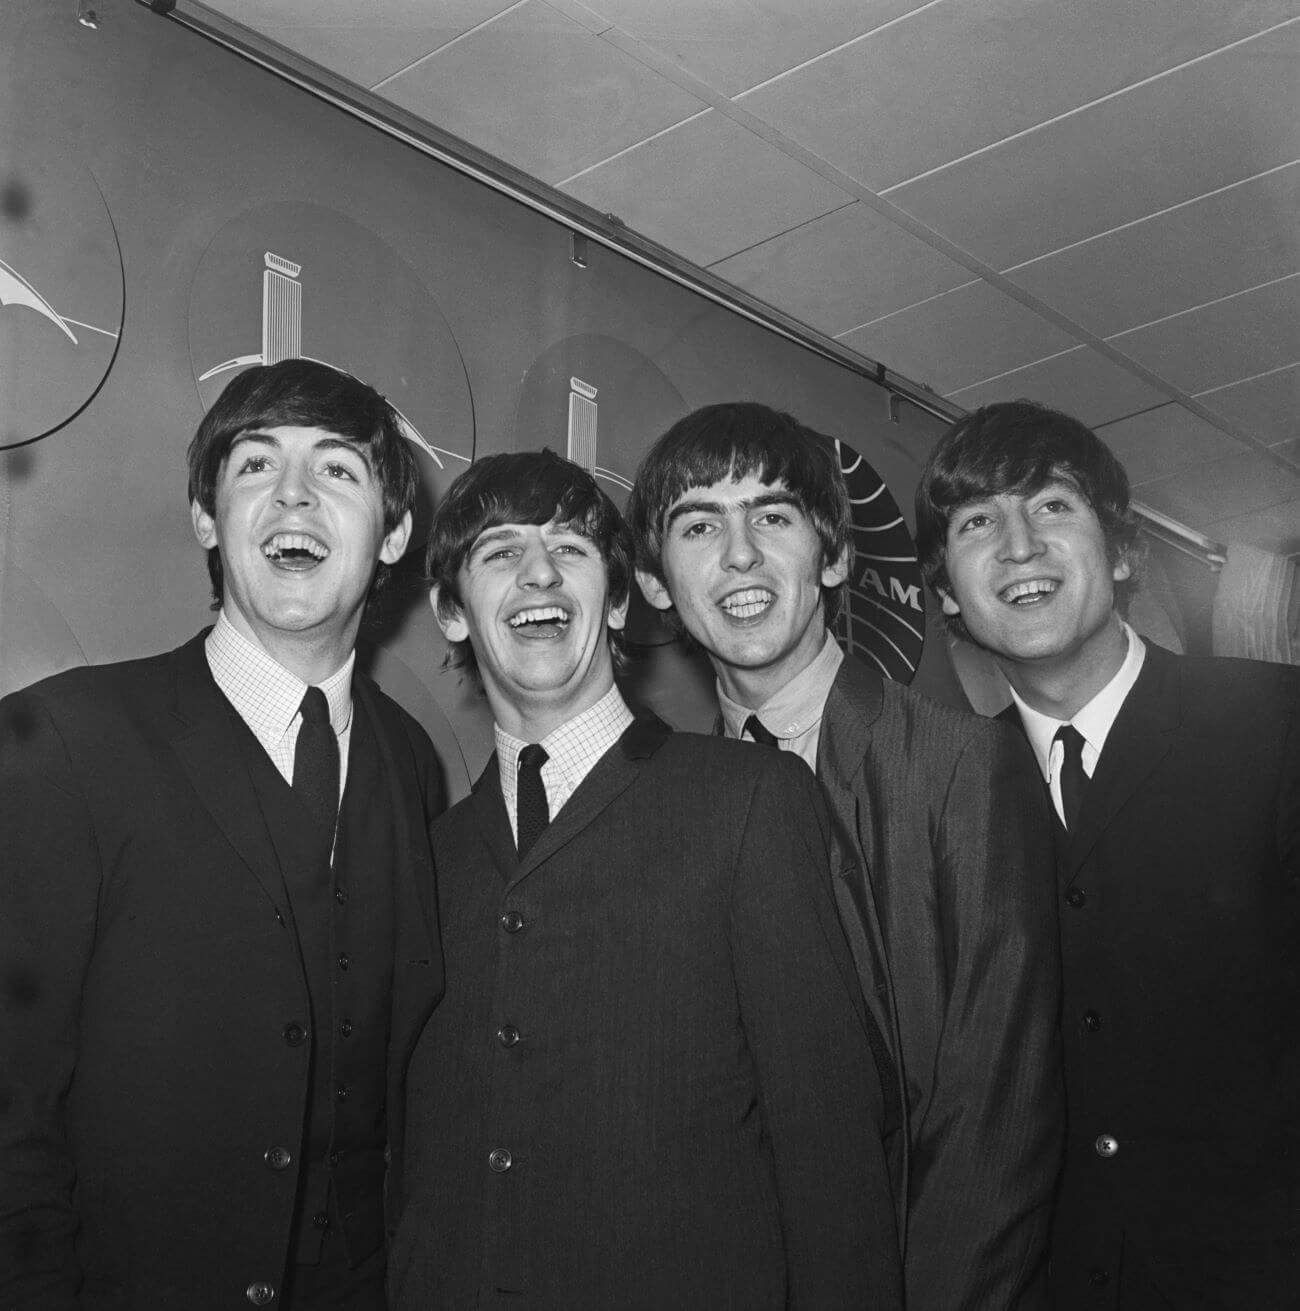 A black and white picture of Paul McCartney, Ringo Starr, George Harrison, and John Lennon wearing suits and smiling.